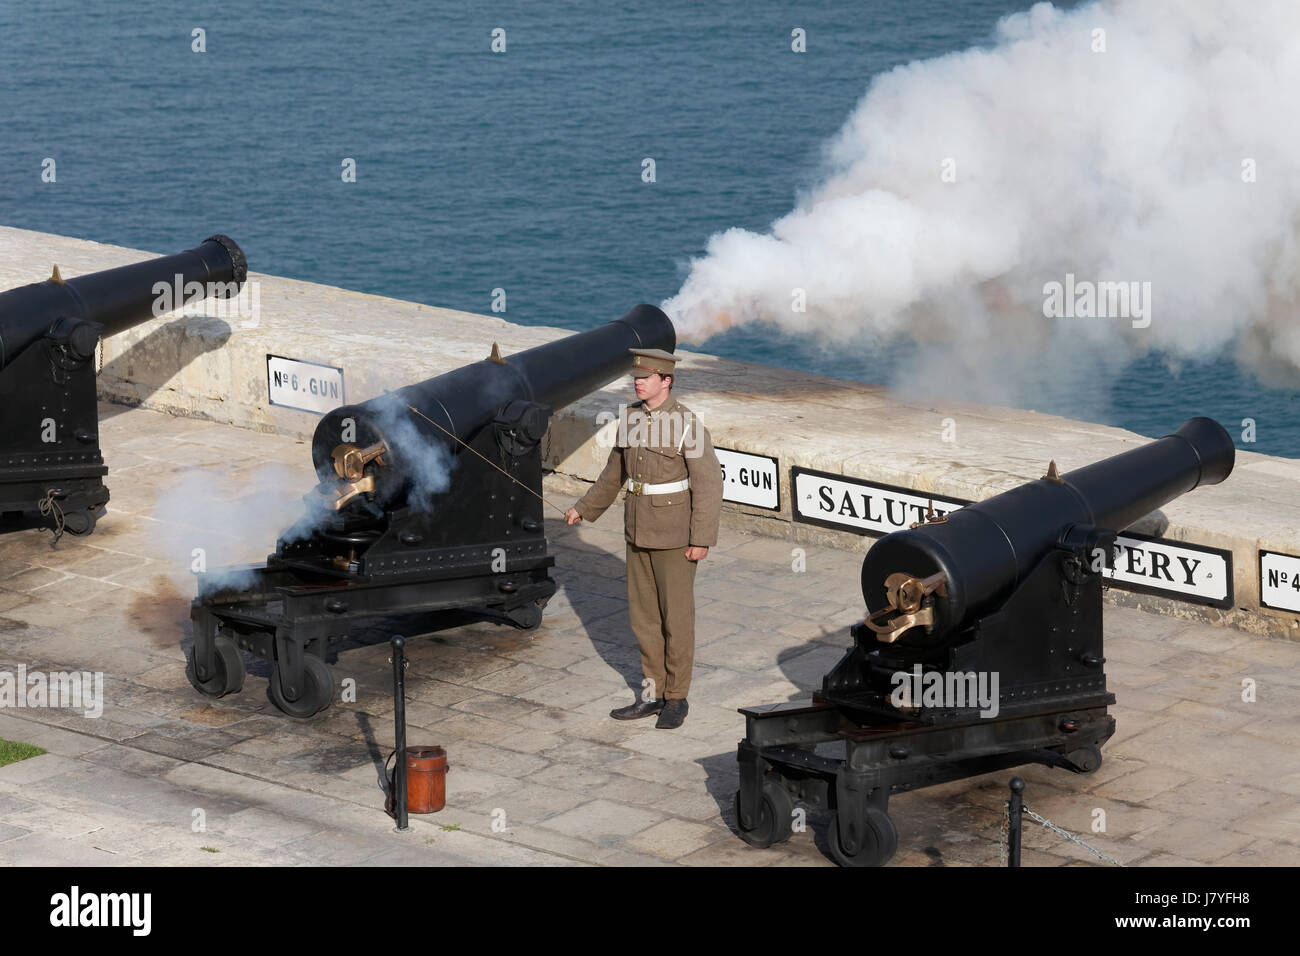 Saluting Battery, cannon shot at 4 pm, afternoon, Valletta, Malta Stock Photo